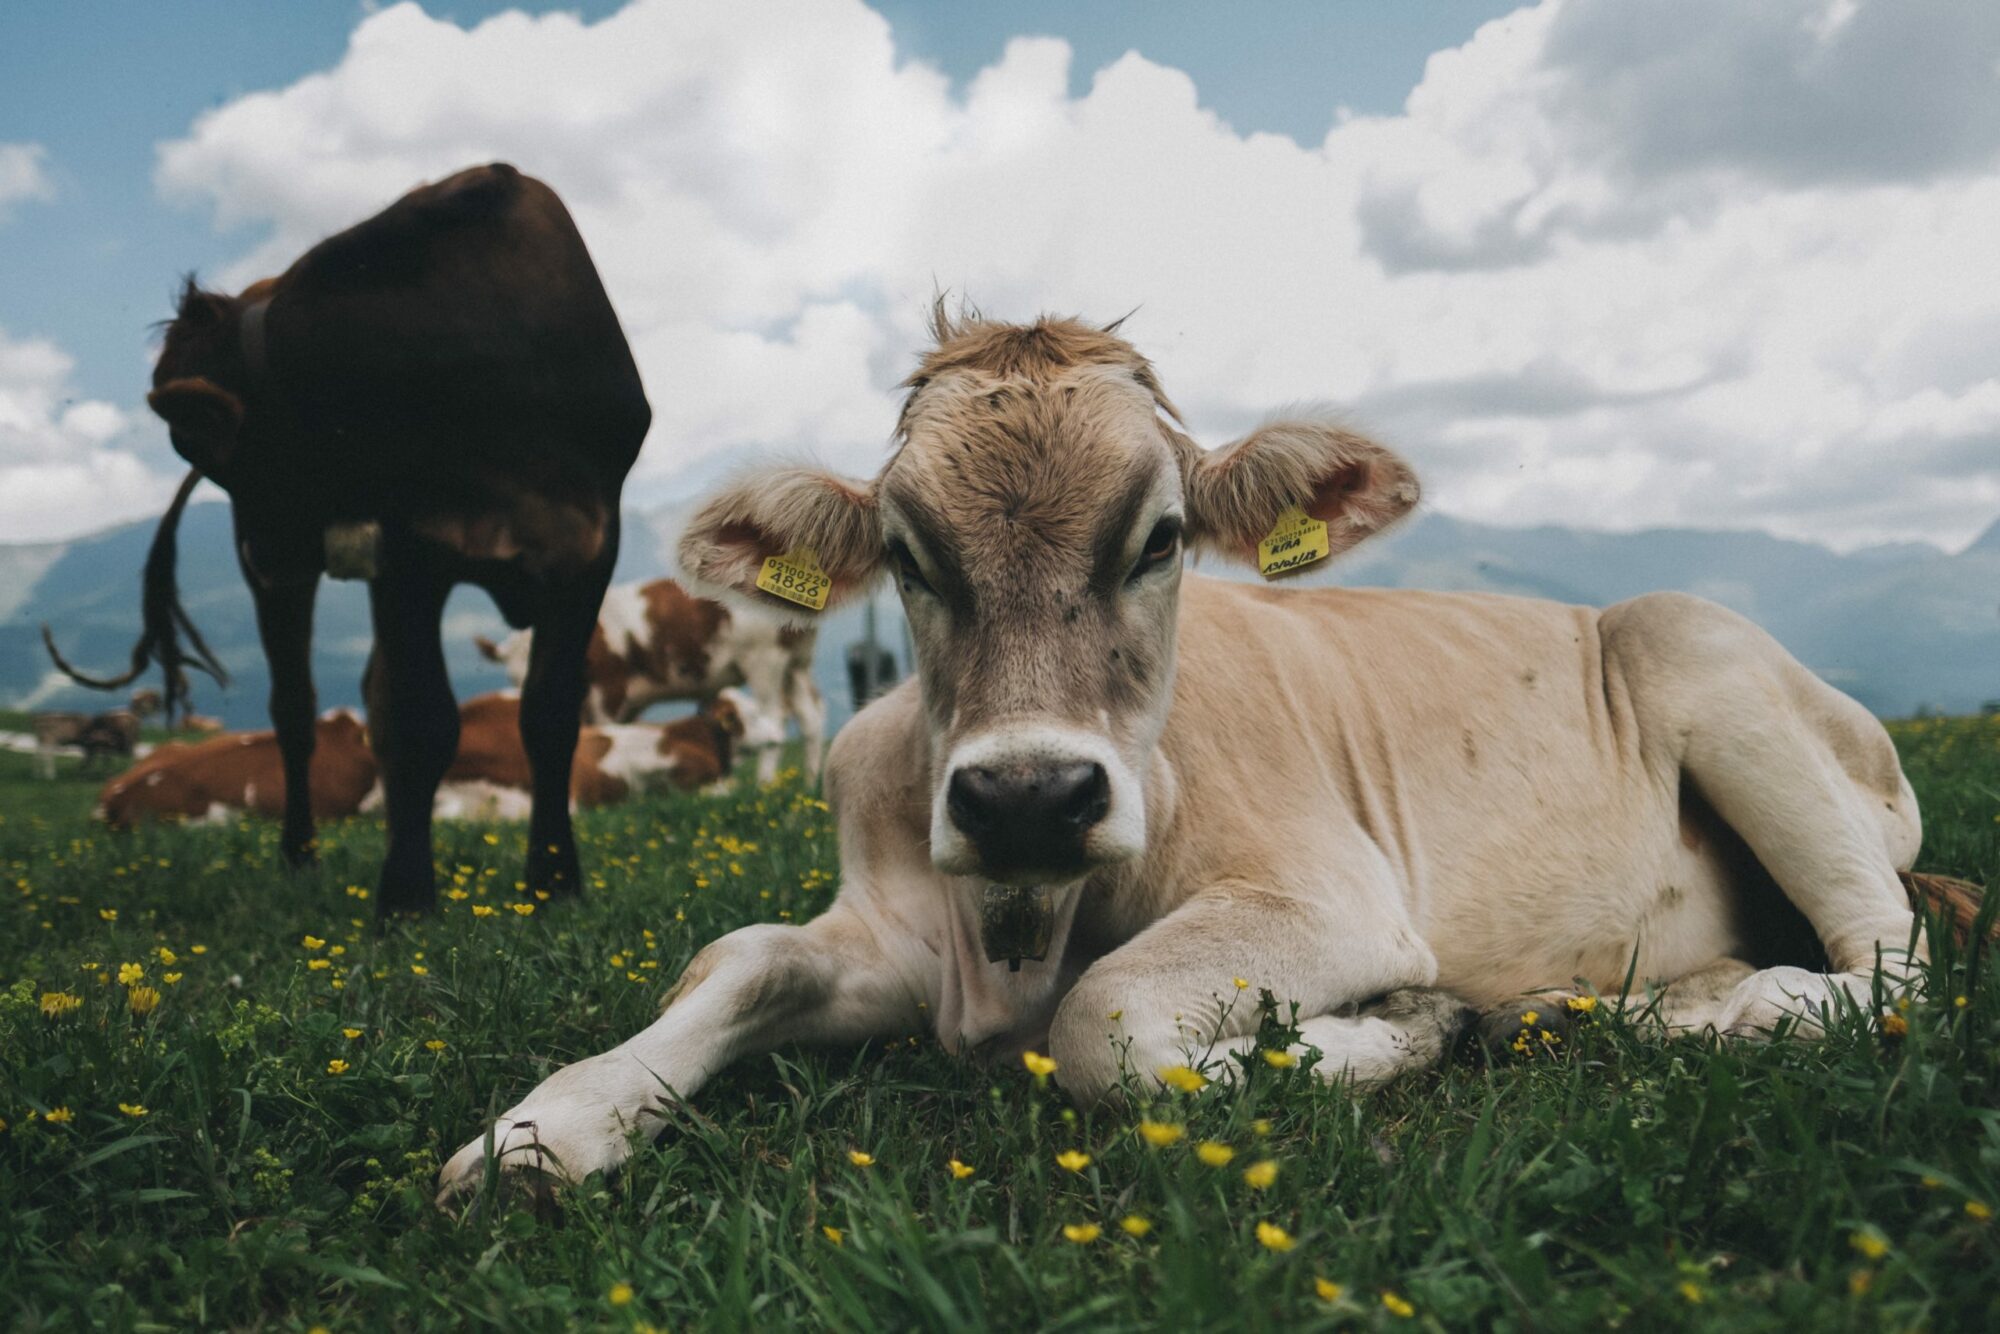 cattle lying on grass